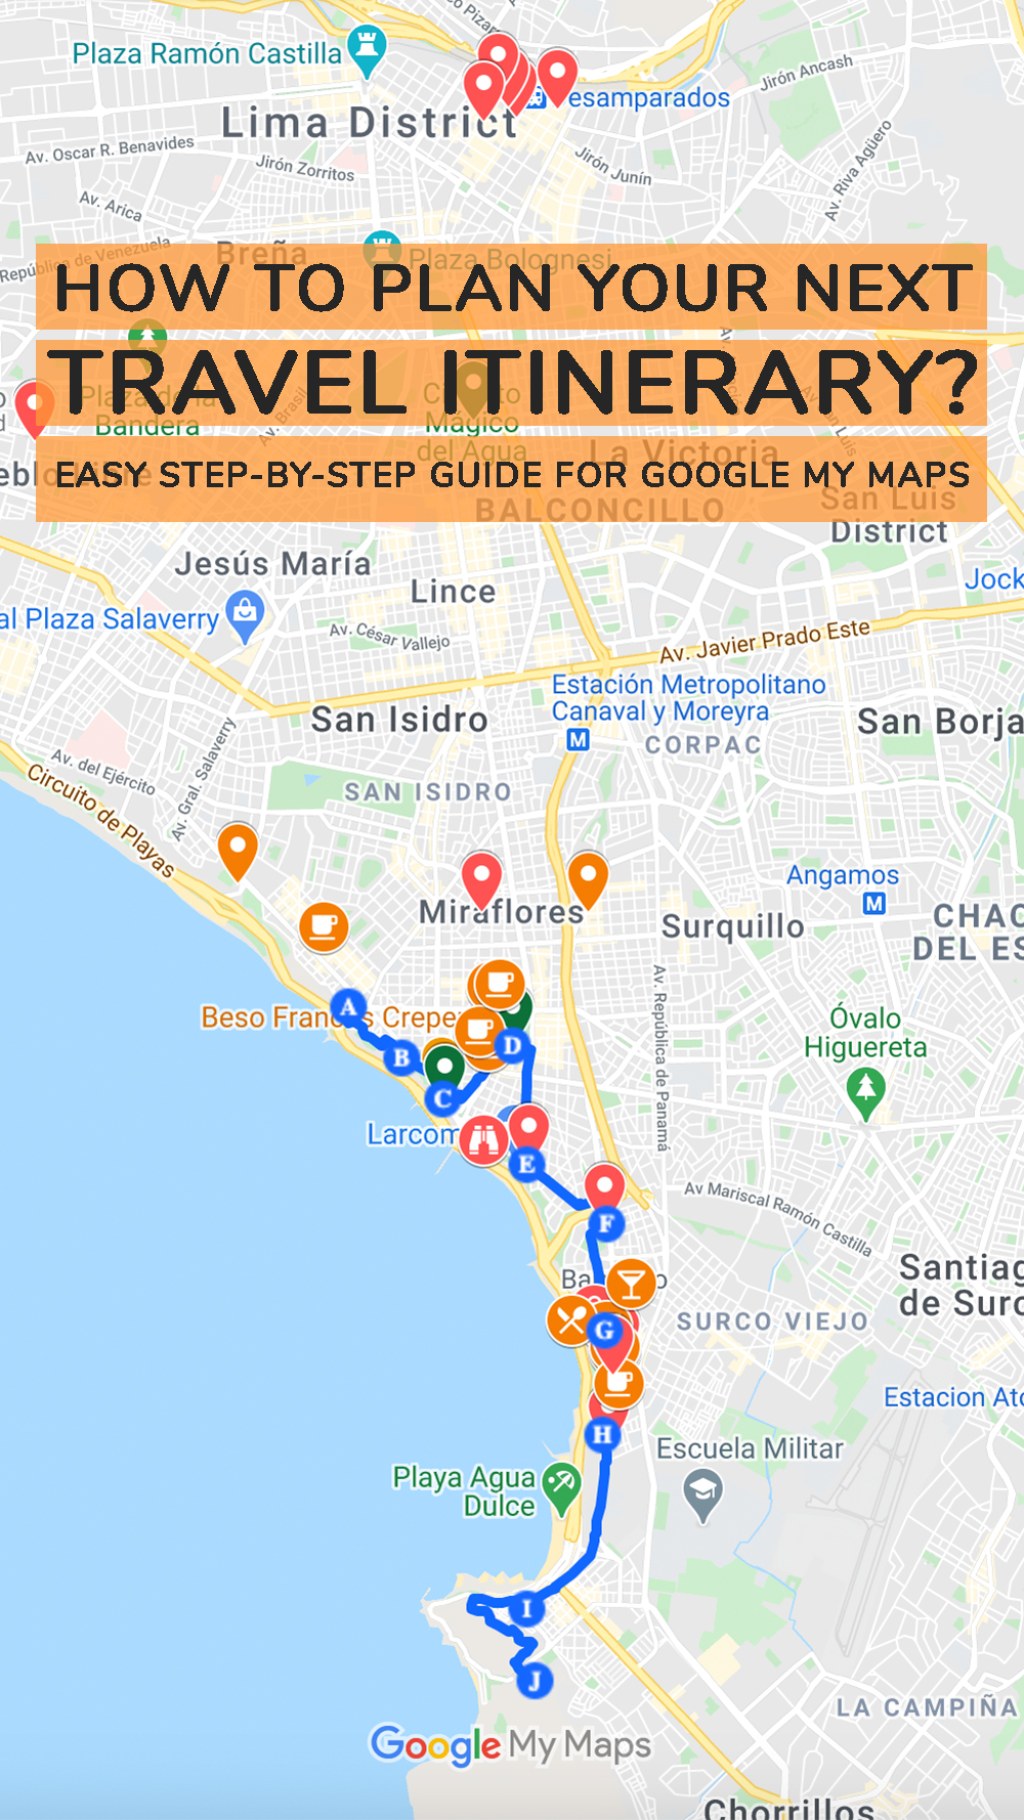 travel itinerary google maps - How to plan your travel itinerary with Google My Maps? - Aliz